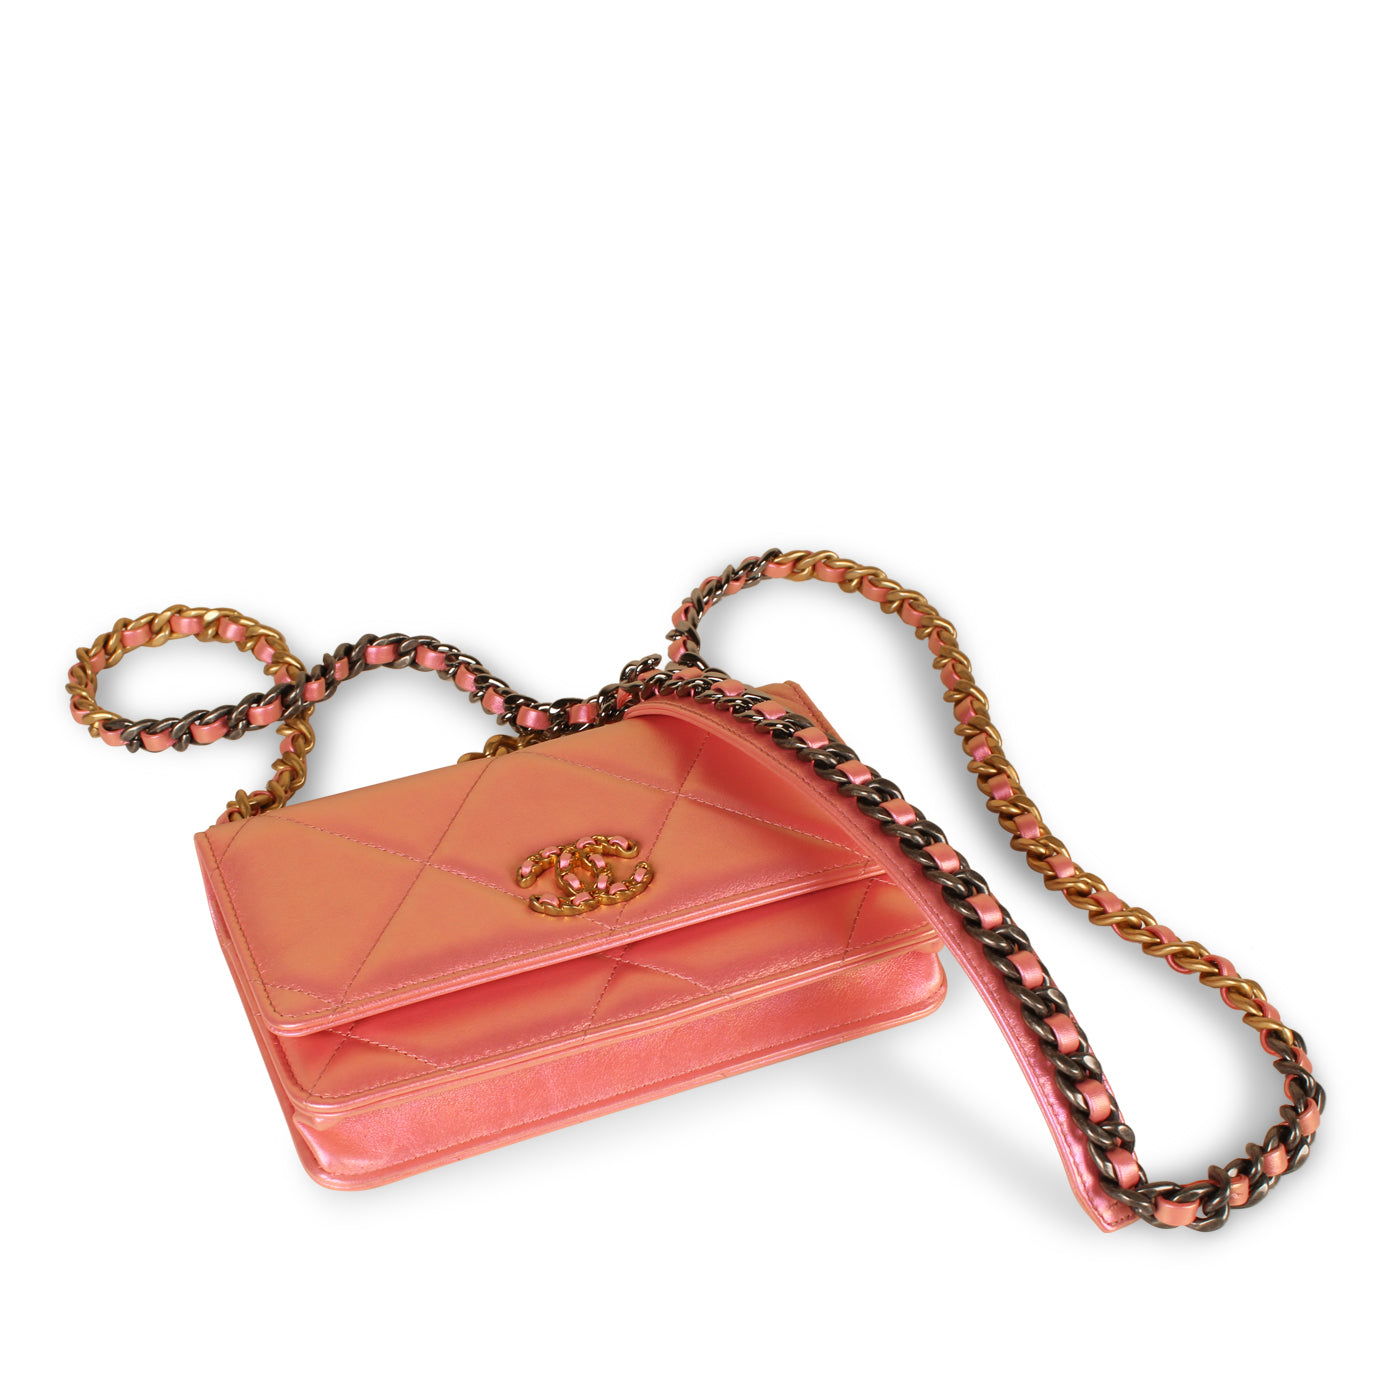 Chanel 19 Iridescent Wallet on Chain WOC Pink 2021